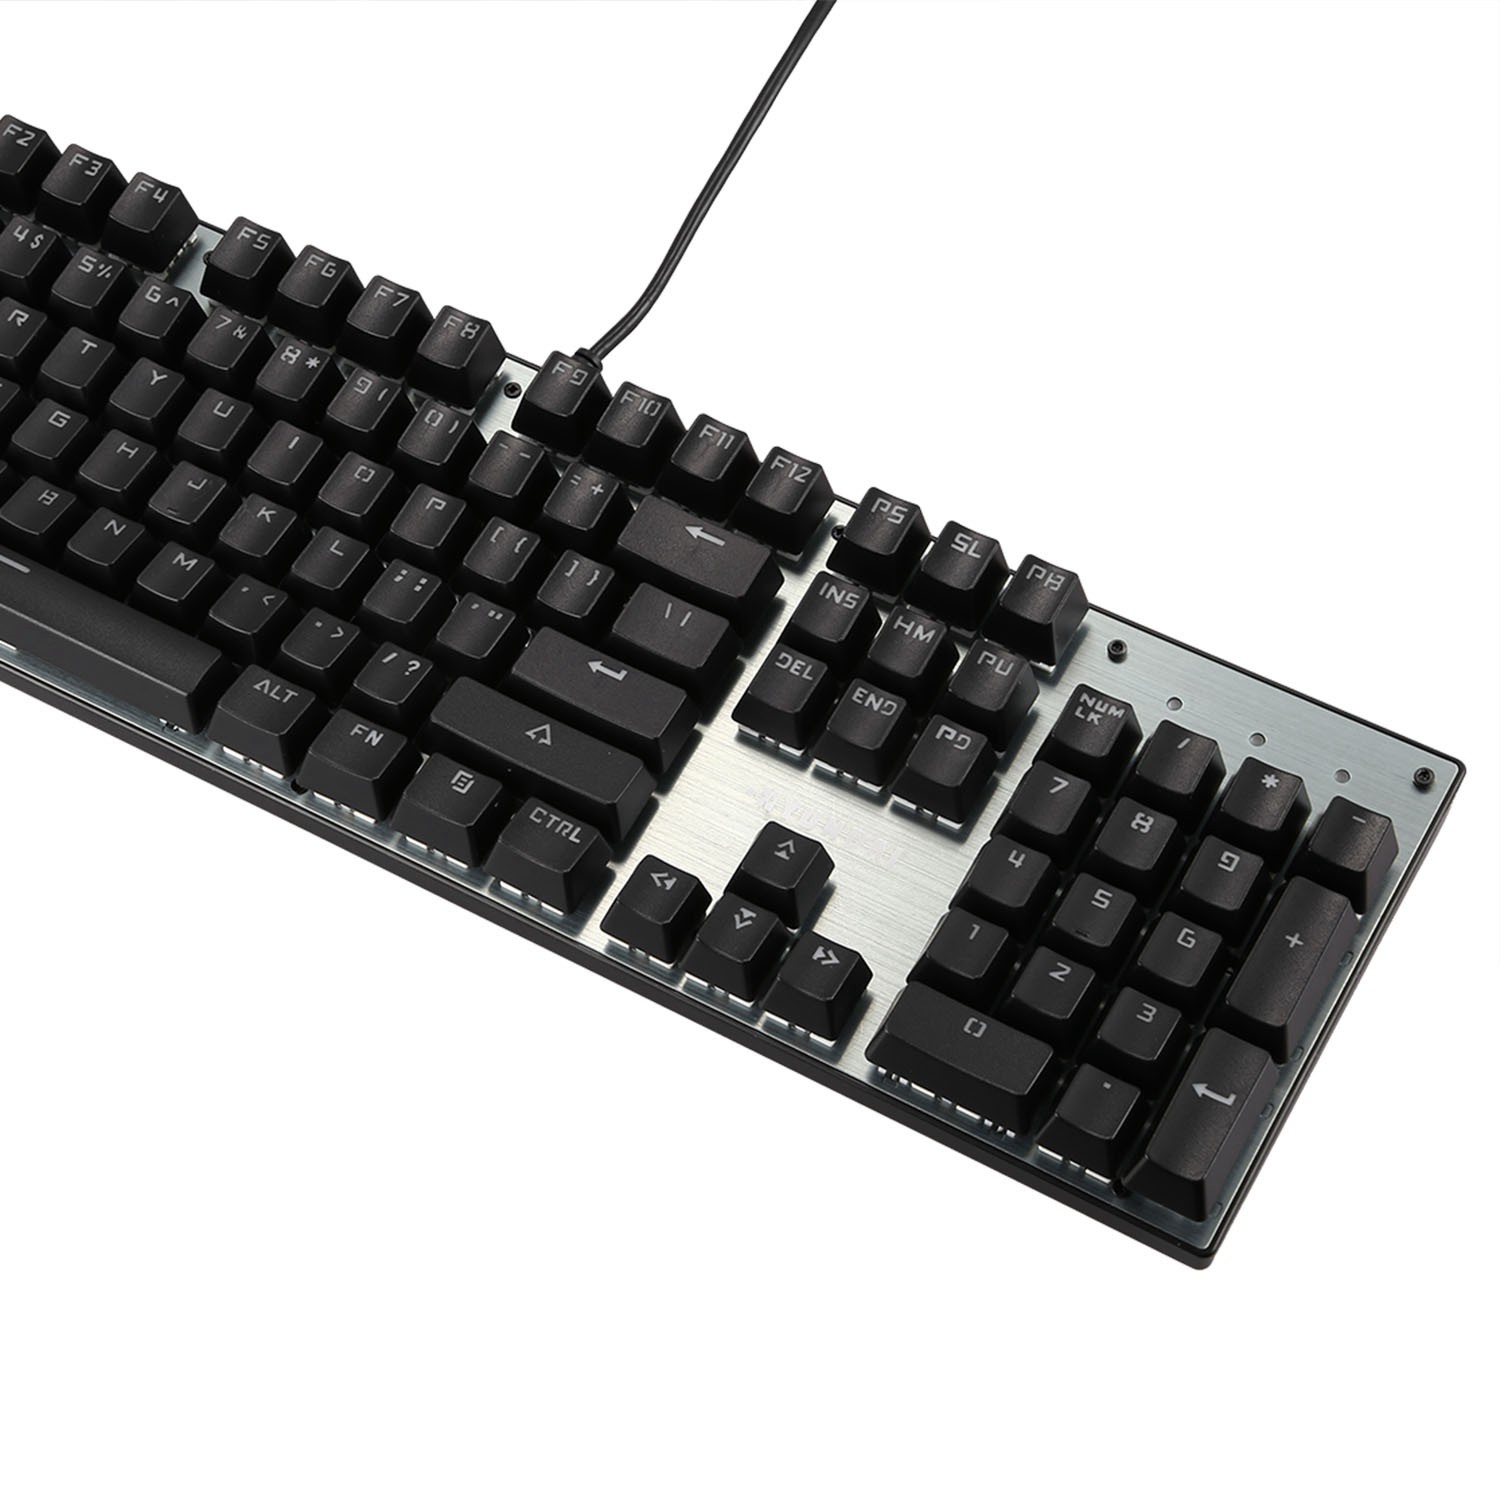 Usb Wired Mechanical Gaming Keyboard Green Axis Switch Backlight Keyboard104 Keycaps For Game Shopee Singapore